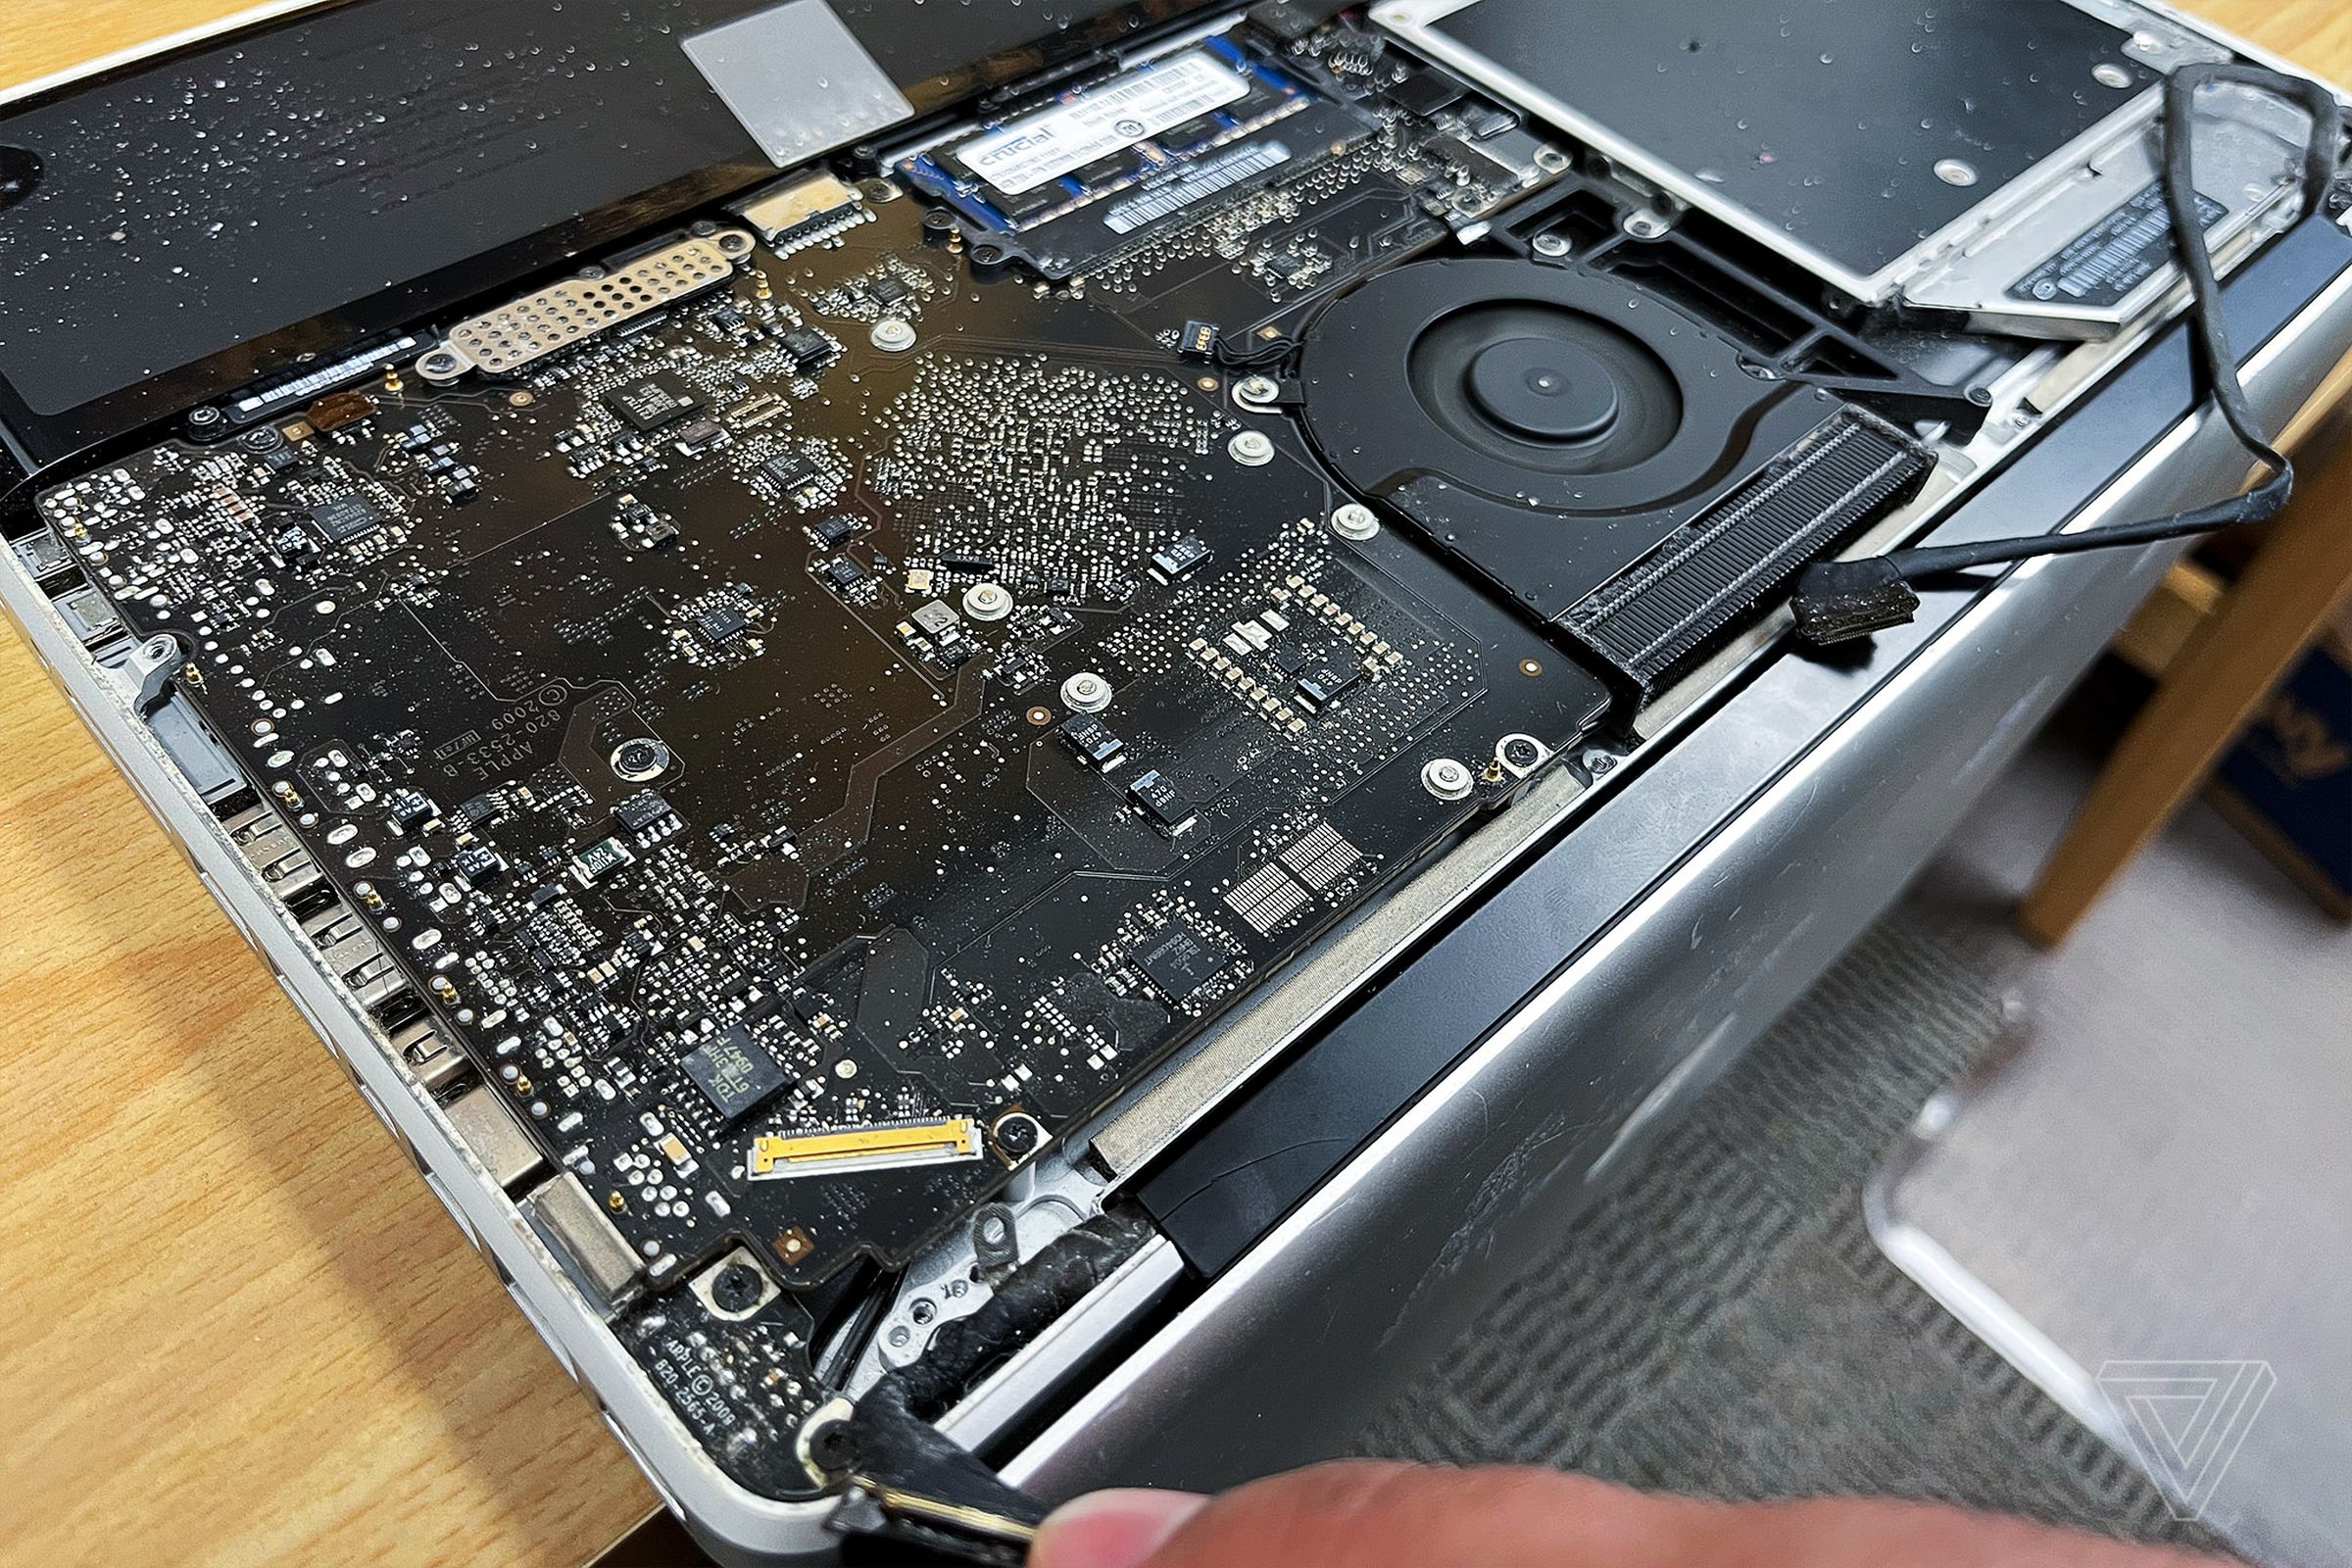 2009 MacBook Pro: The fan started spinning because I accidentally turned the computer on during surgery. Don’t forget to disconnect the battery.